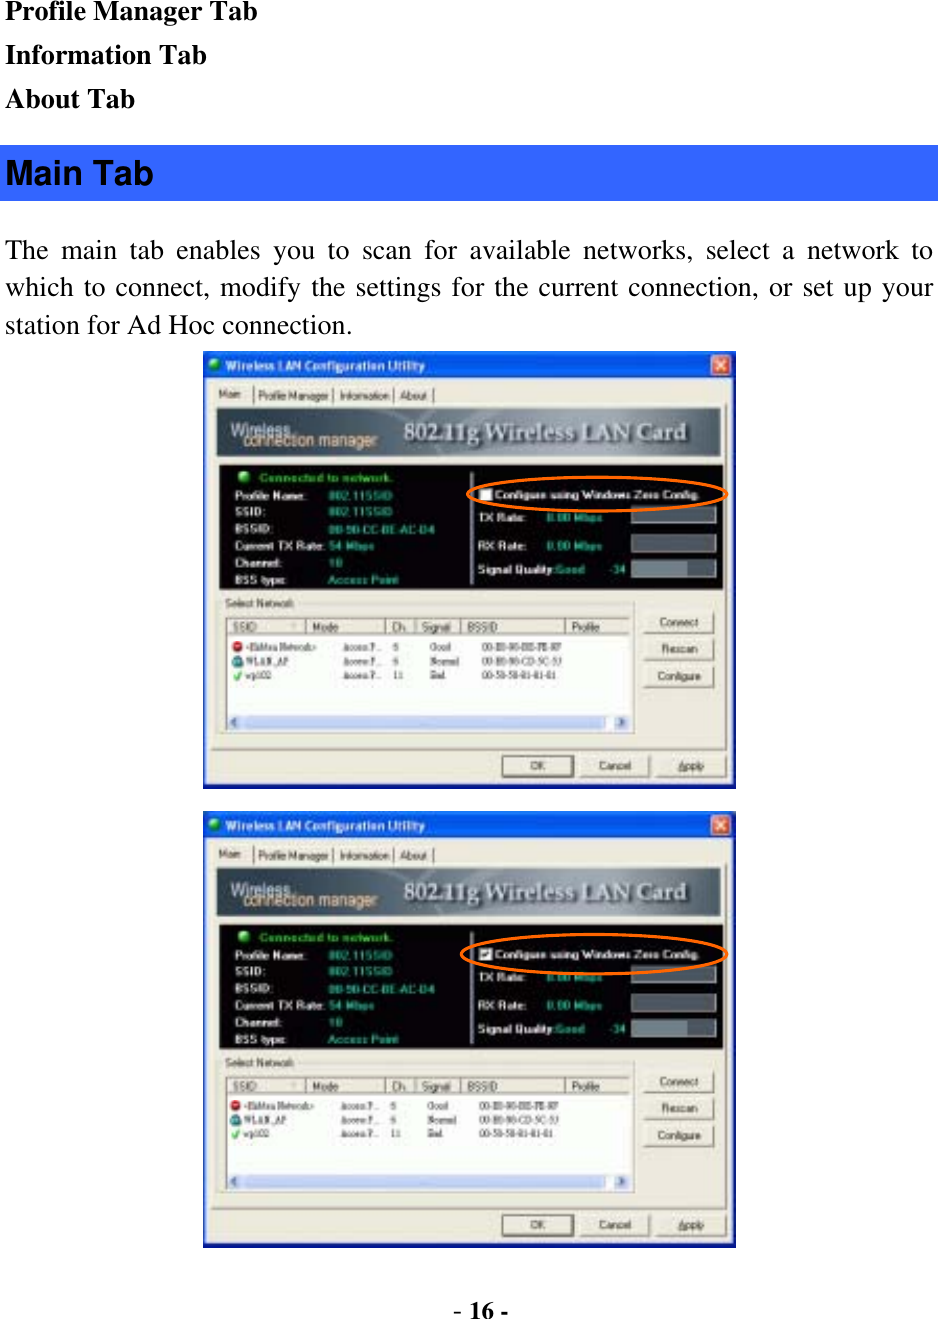  - 16 - Profile Manager Tab Information Tab About Tab Main Tab The main tab enables you to scan for available networks, select a network to which to connect, modify the settings for the current connection, or set up your station for Ad Hoc connection.   